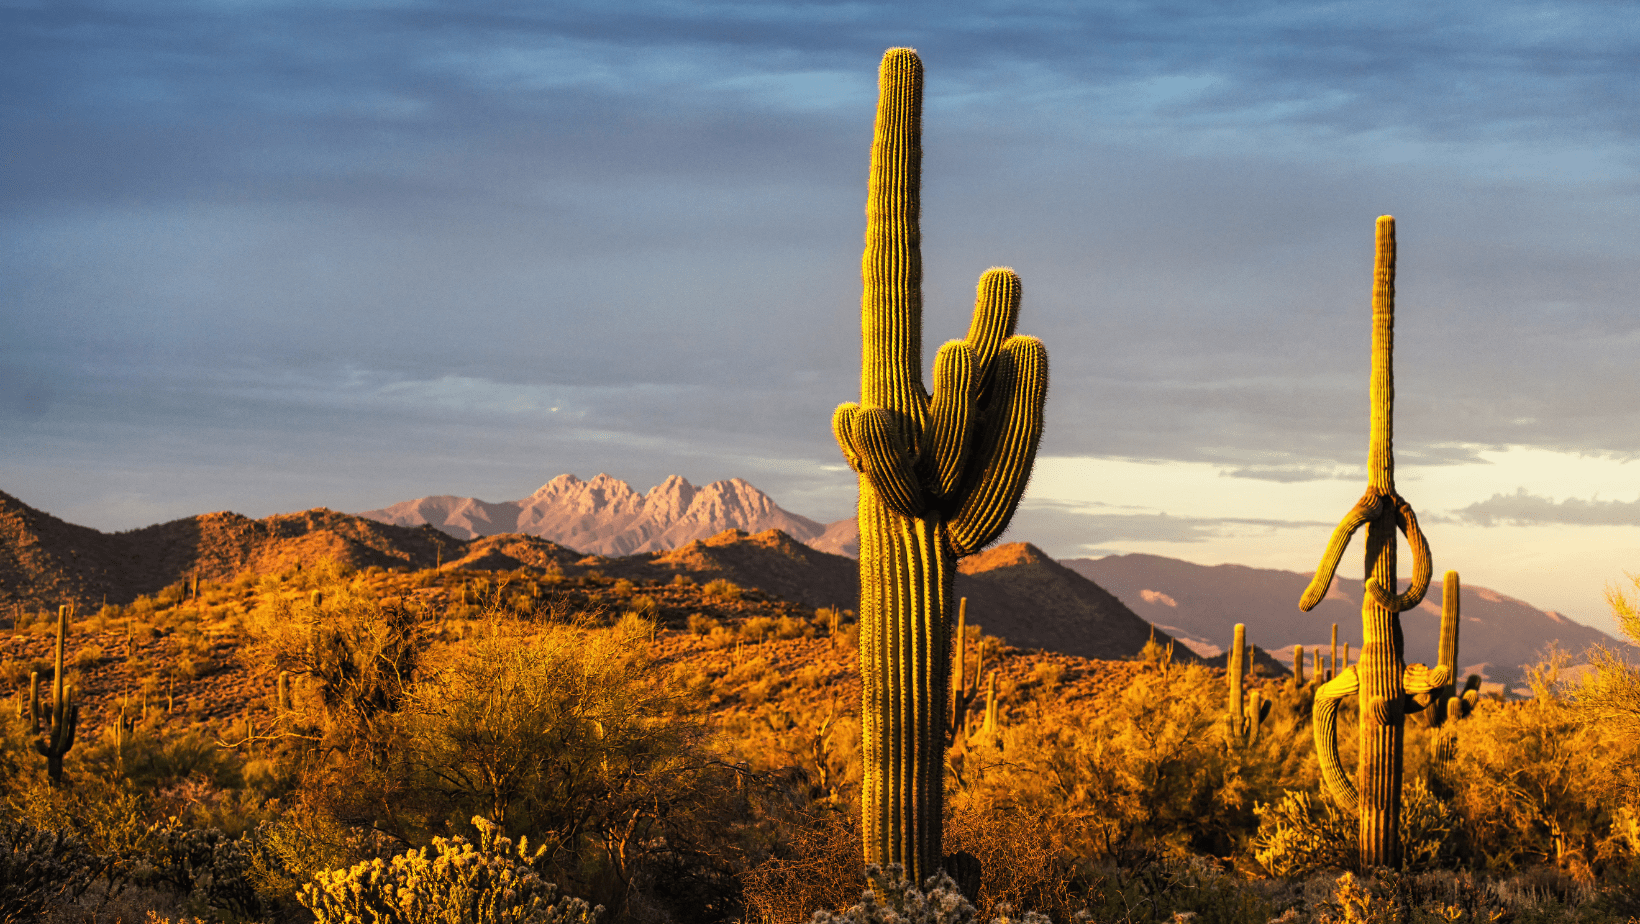 Deserts You Can Visit in the U.S.